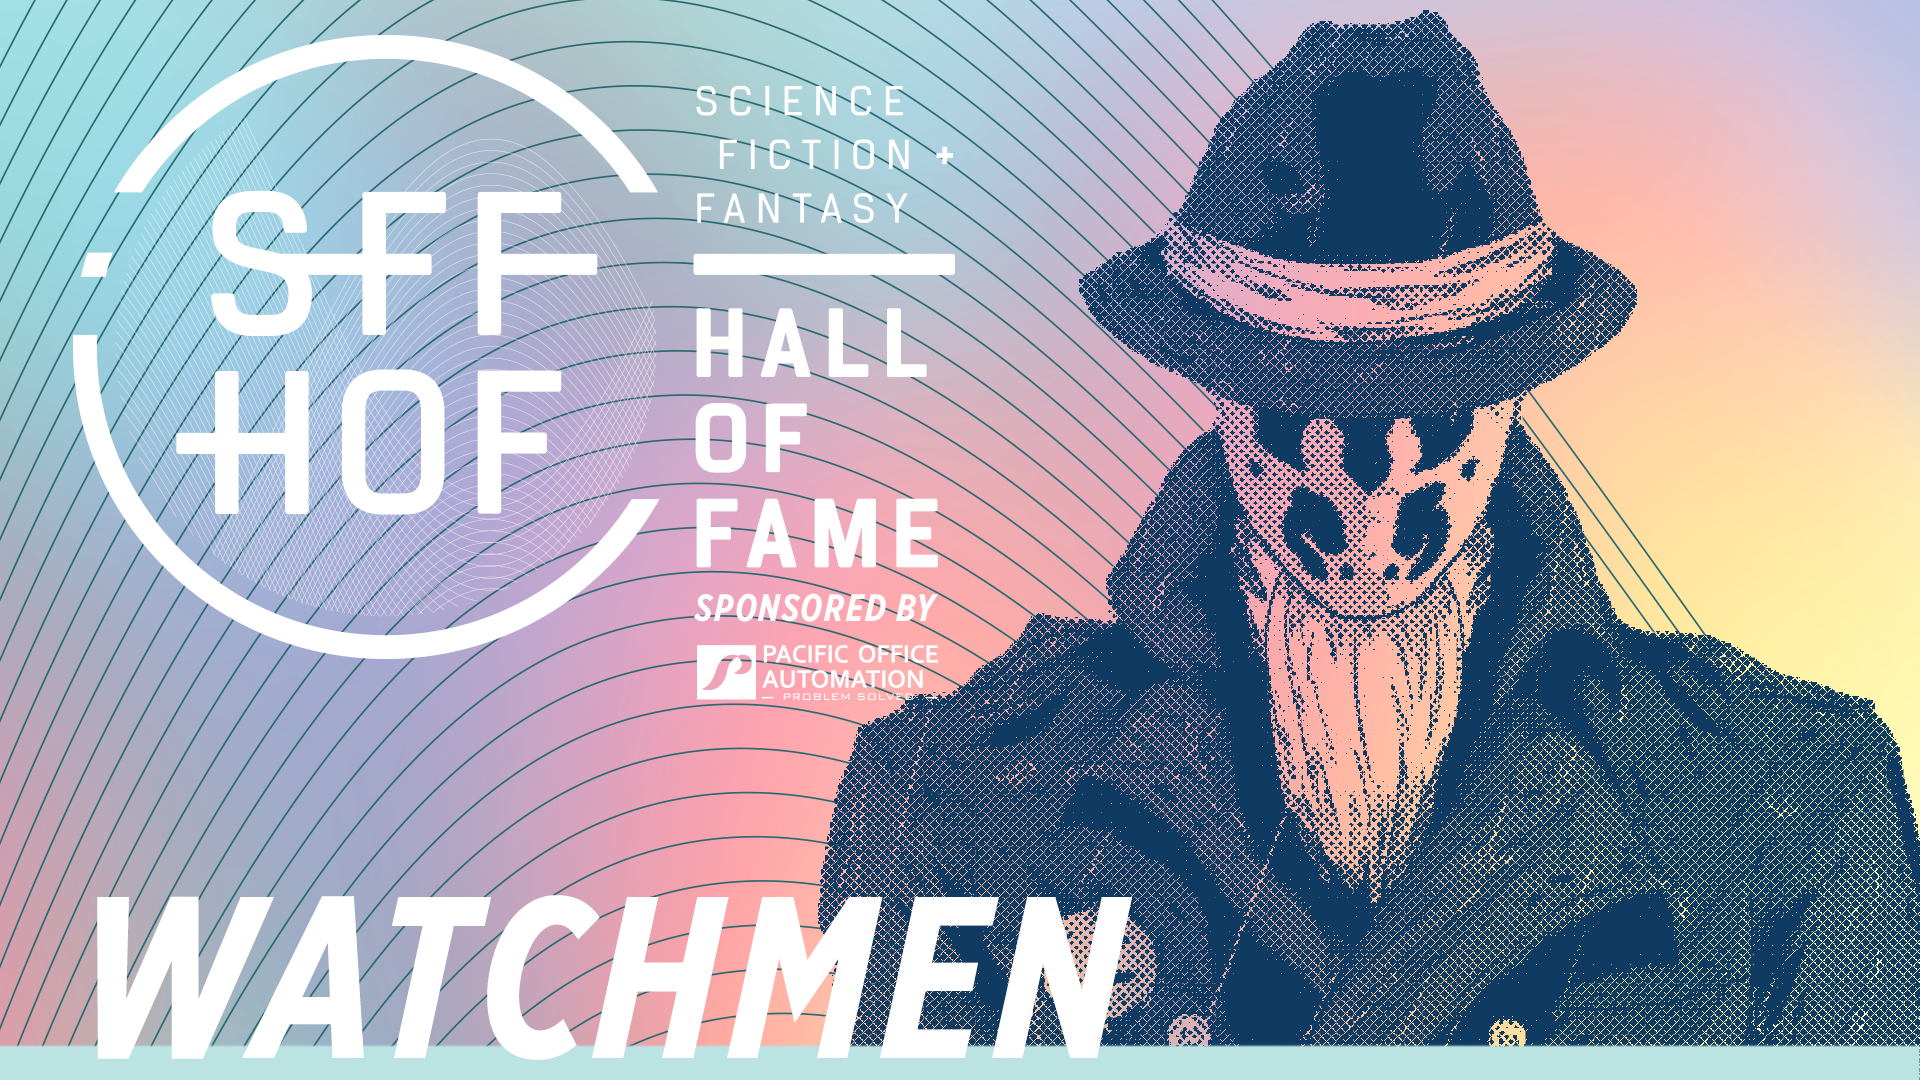 MoPOP Science Fiction + Fantasy Hall of Fame inductee graphic for Watchmen